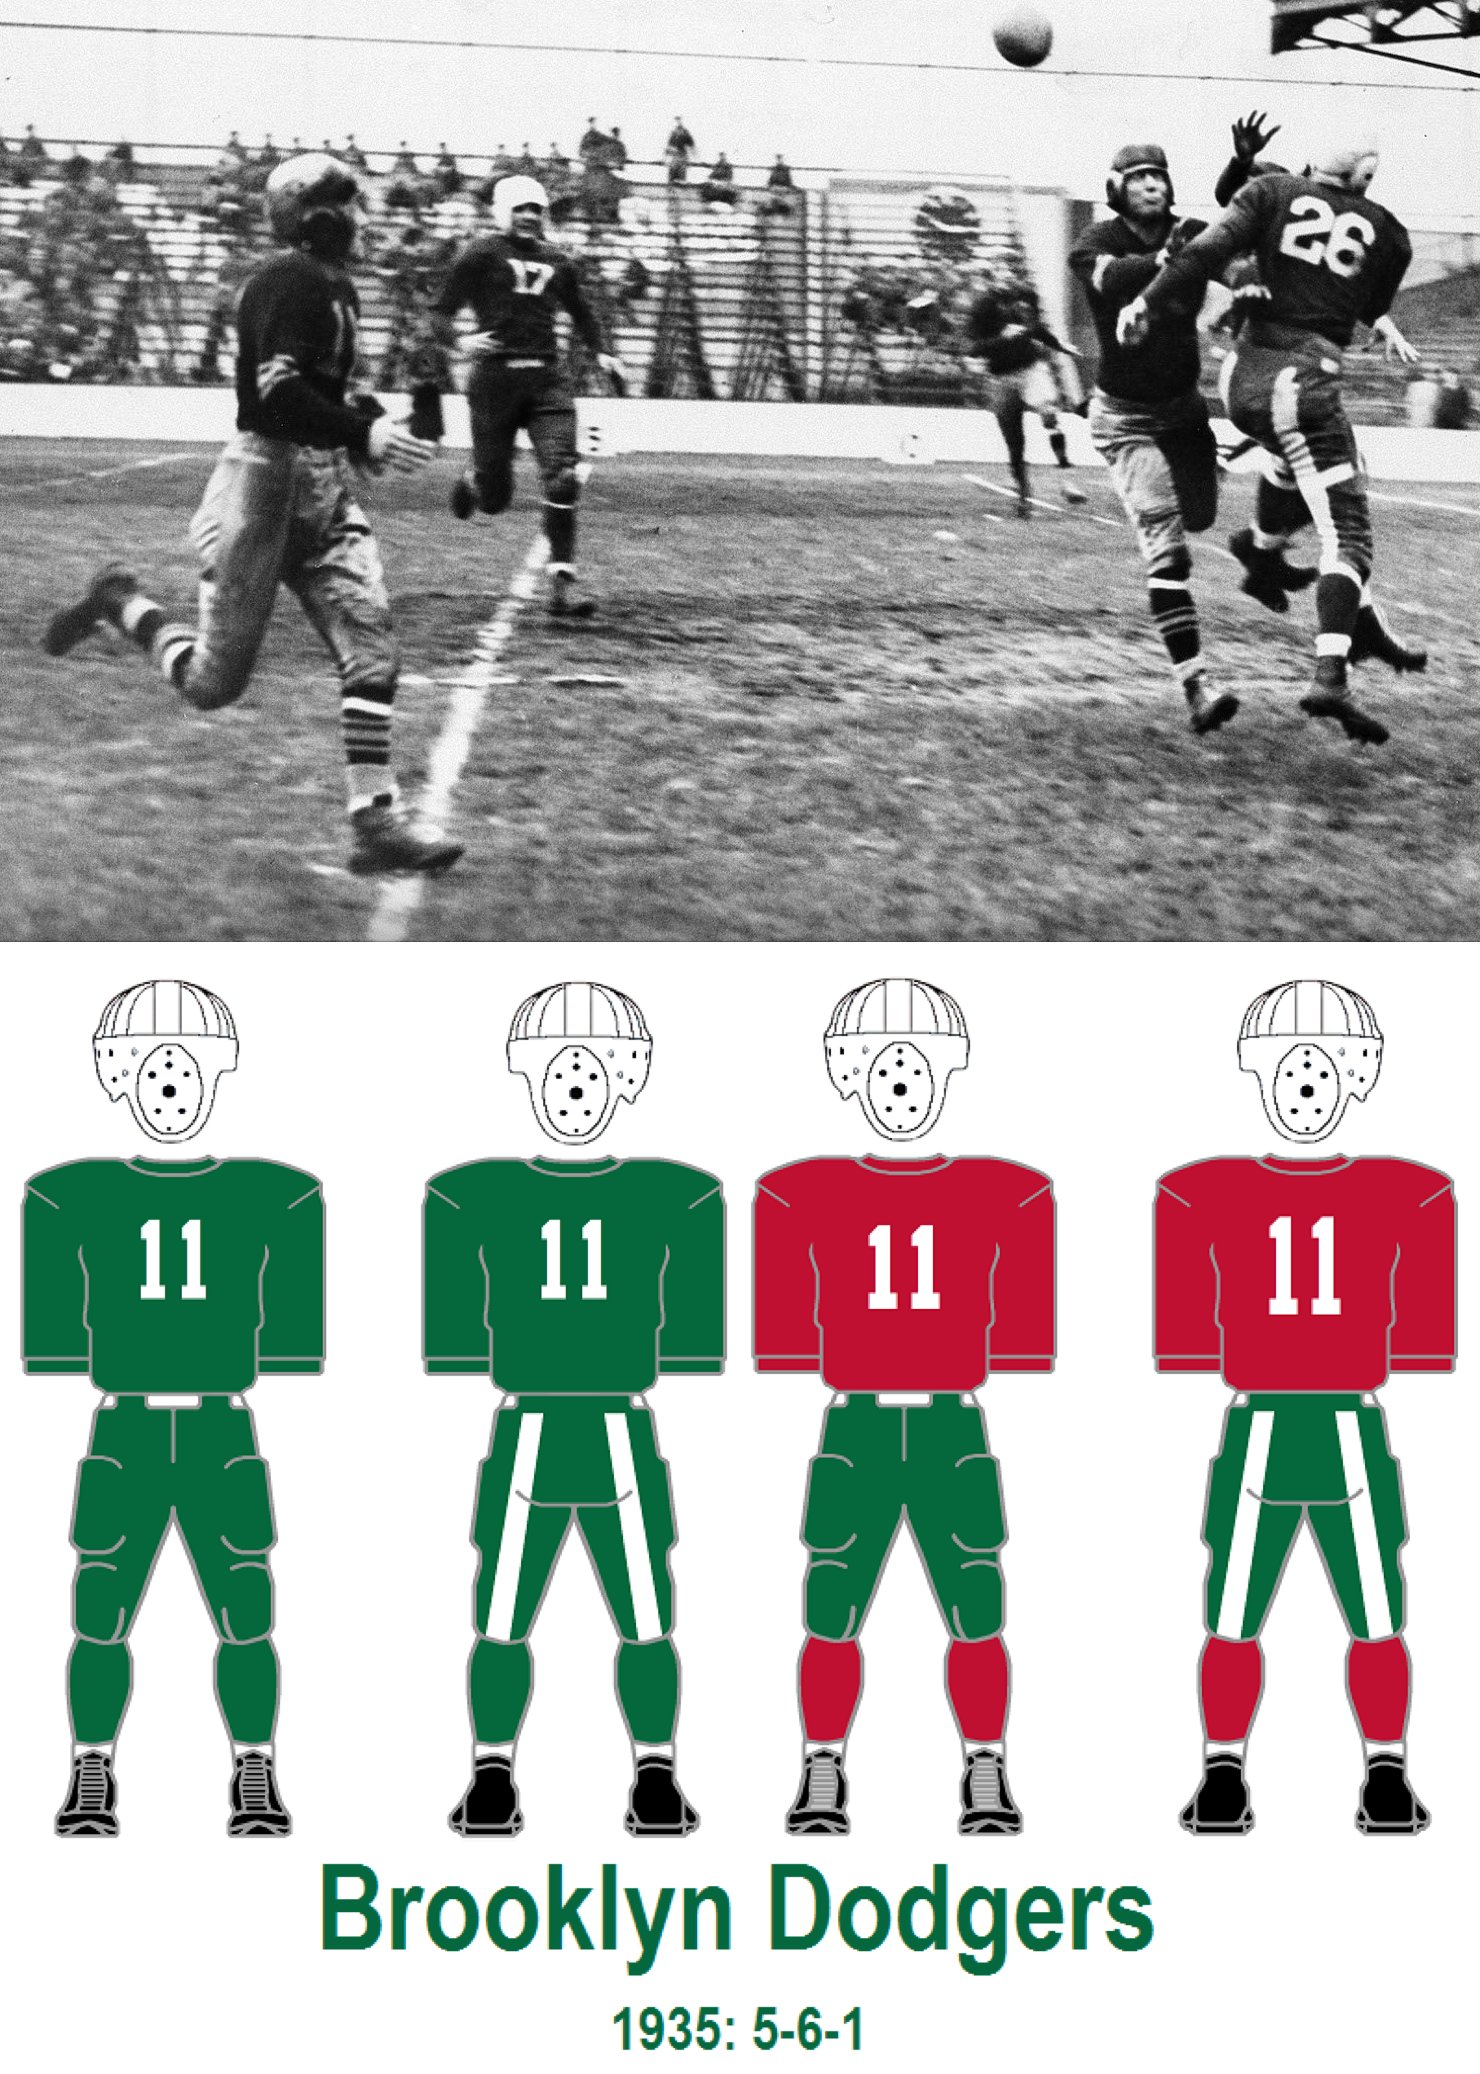 Paul Lukas on X: Long before Color Rush: 1935-36 Brooklyn Dodgers (yes,  that was an NFL team) wore solid-green uniforms.  /  X